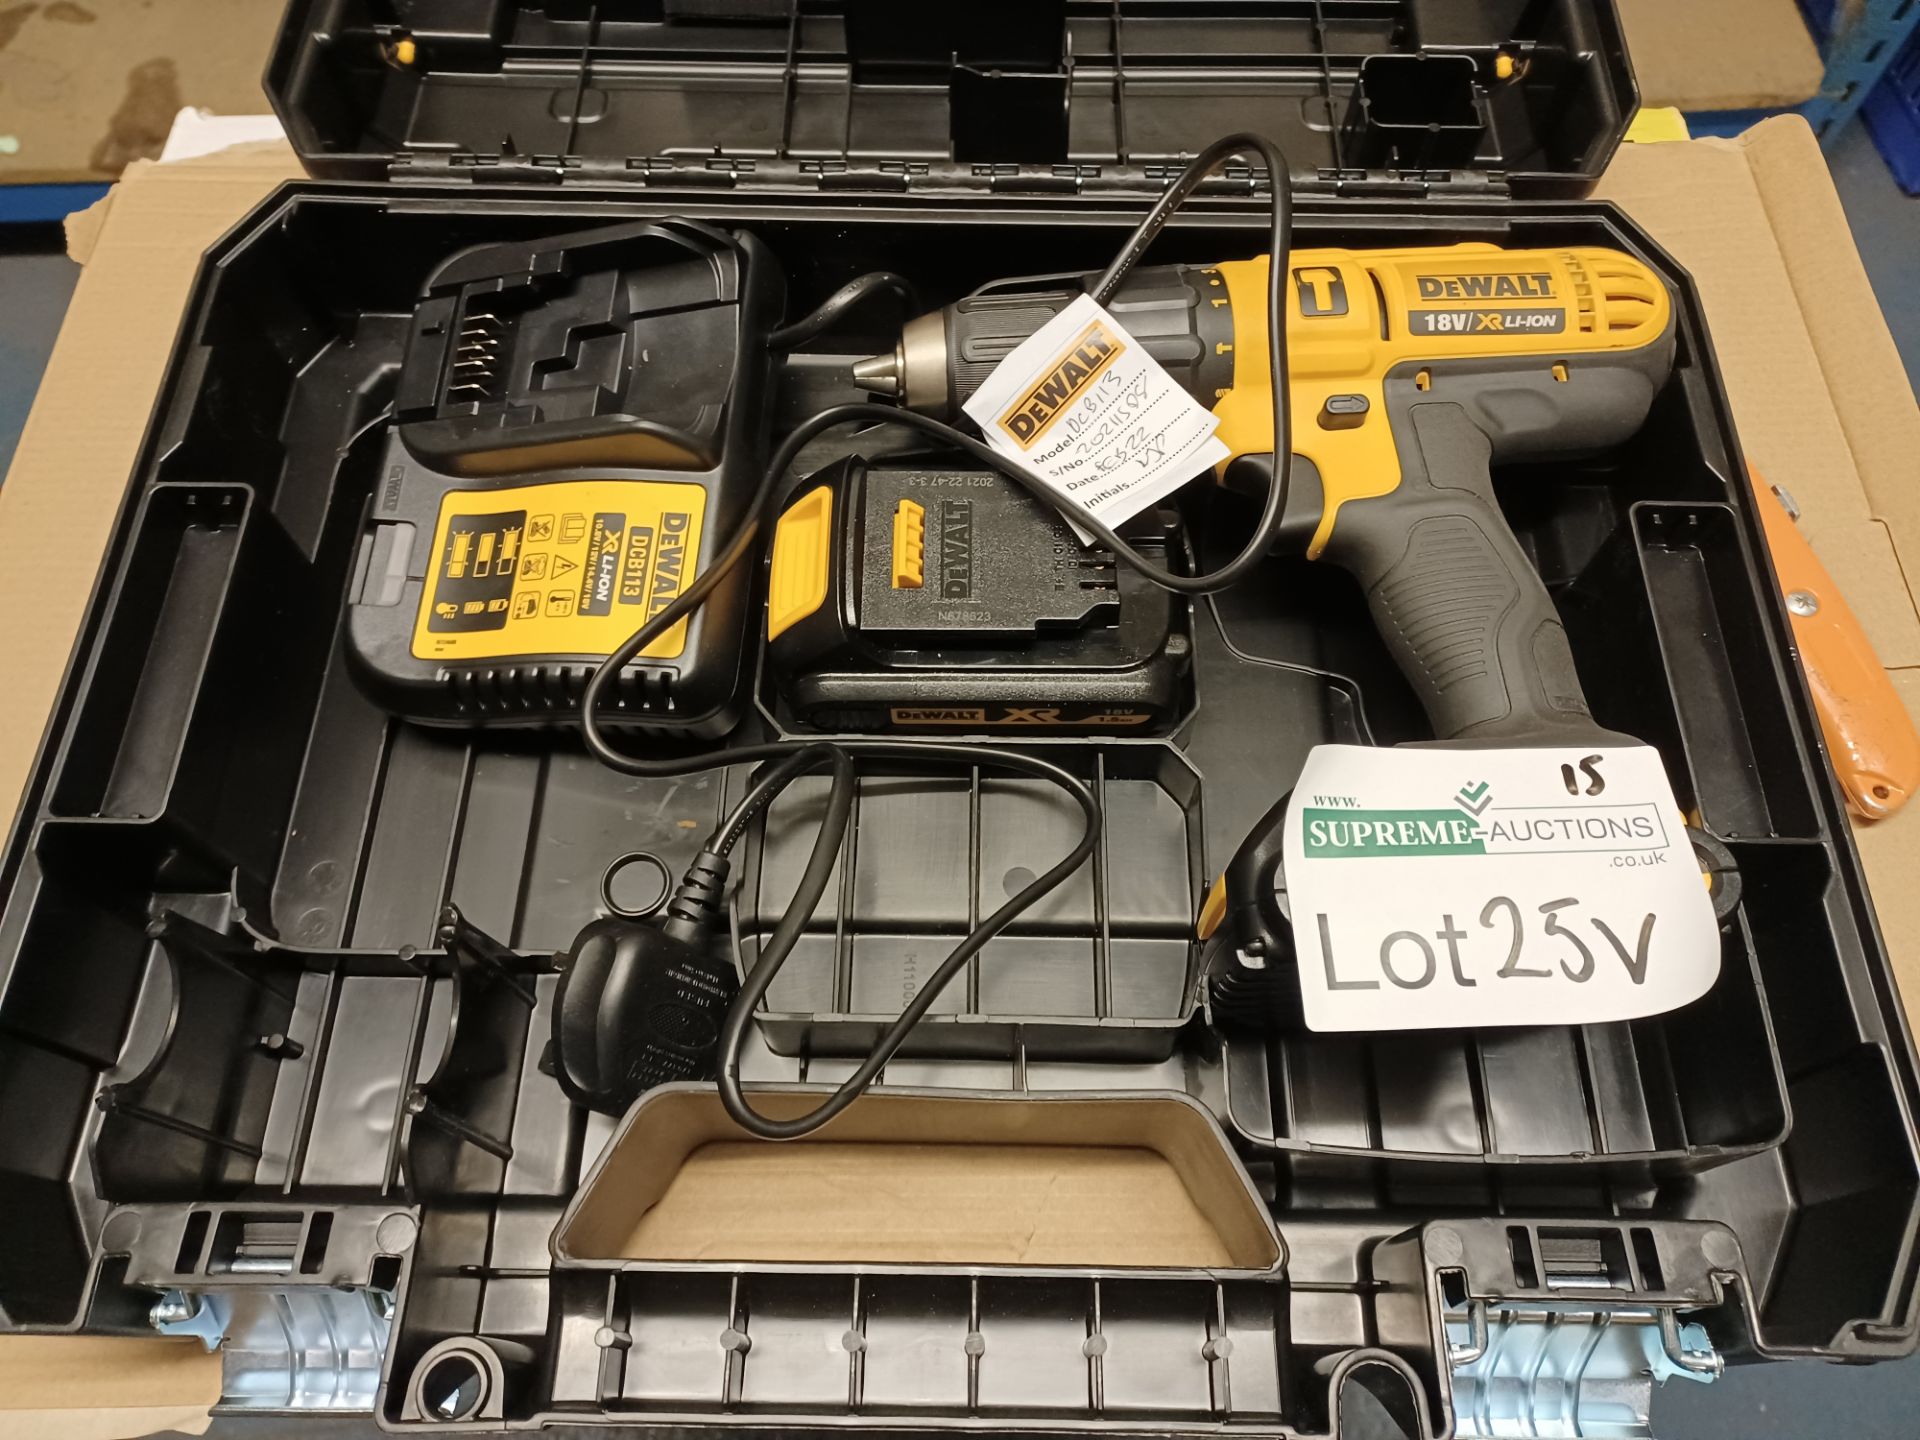 DEWALT DCD776S2T-GB 18V 1.5AH LI-ION XR CORDLESS COMBI DRILL WITH 2 BATTERIES CHARGER AND CARRY